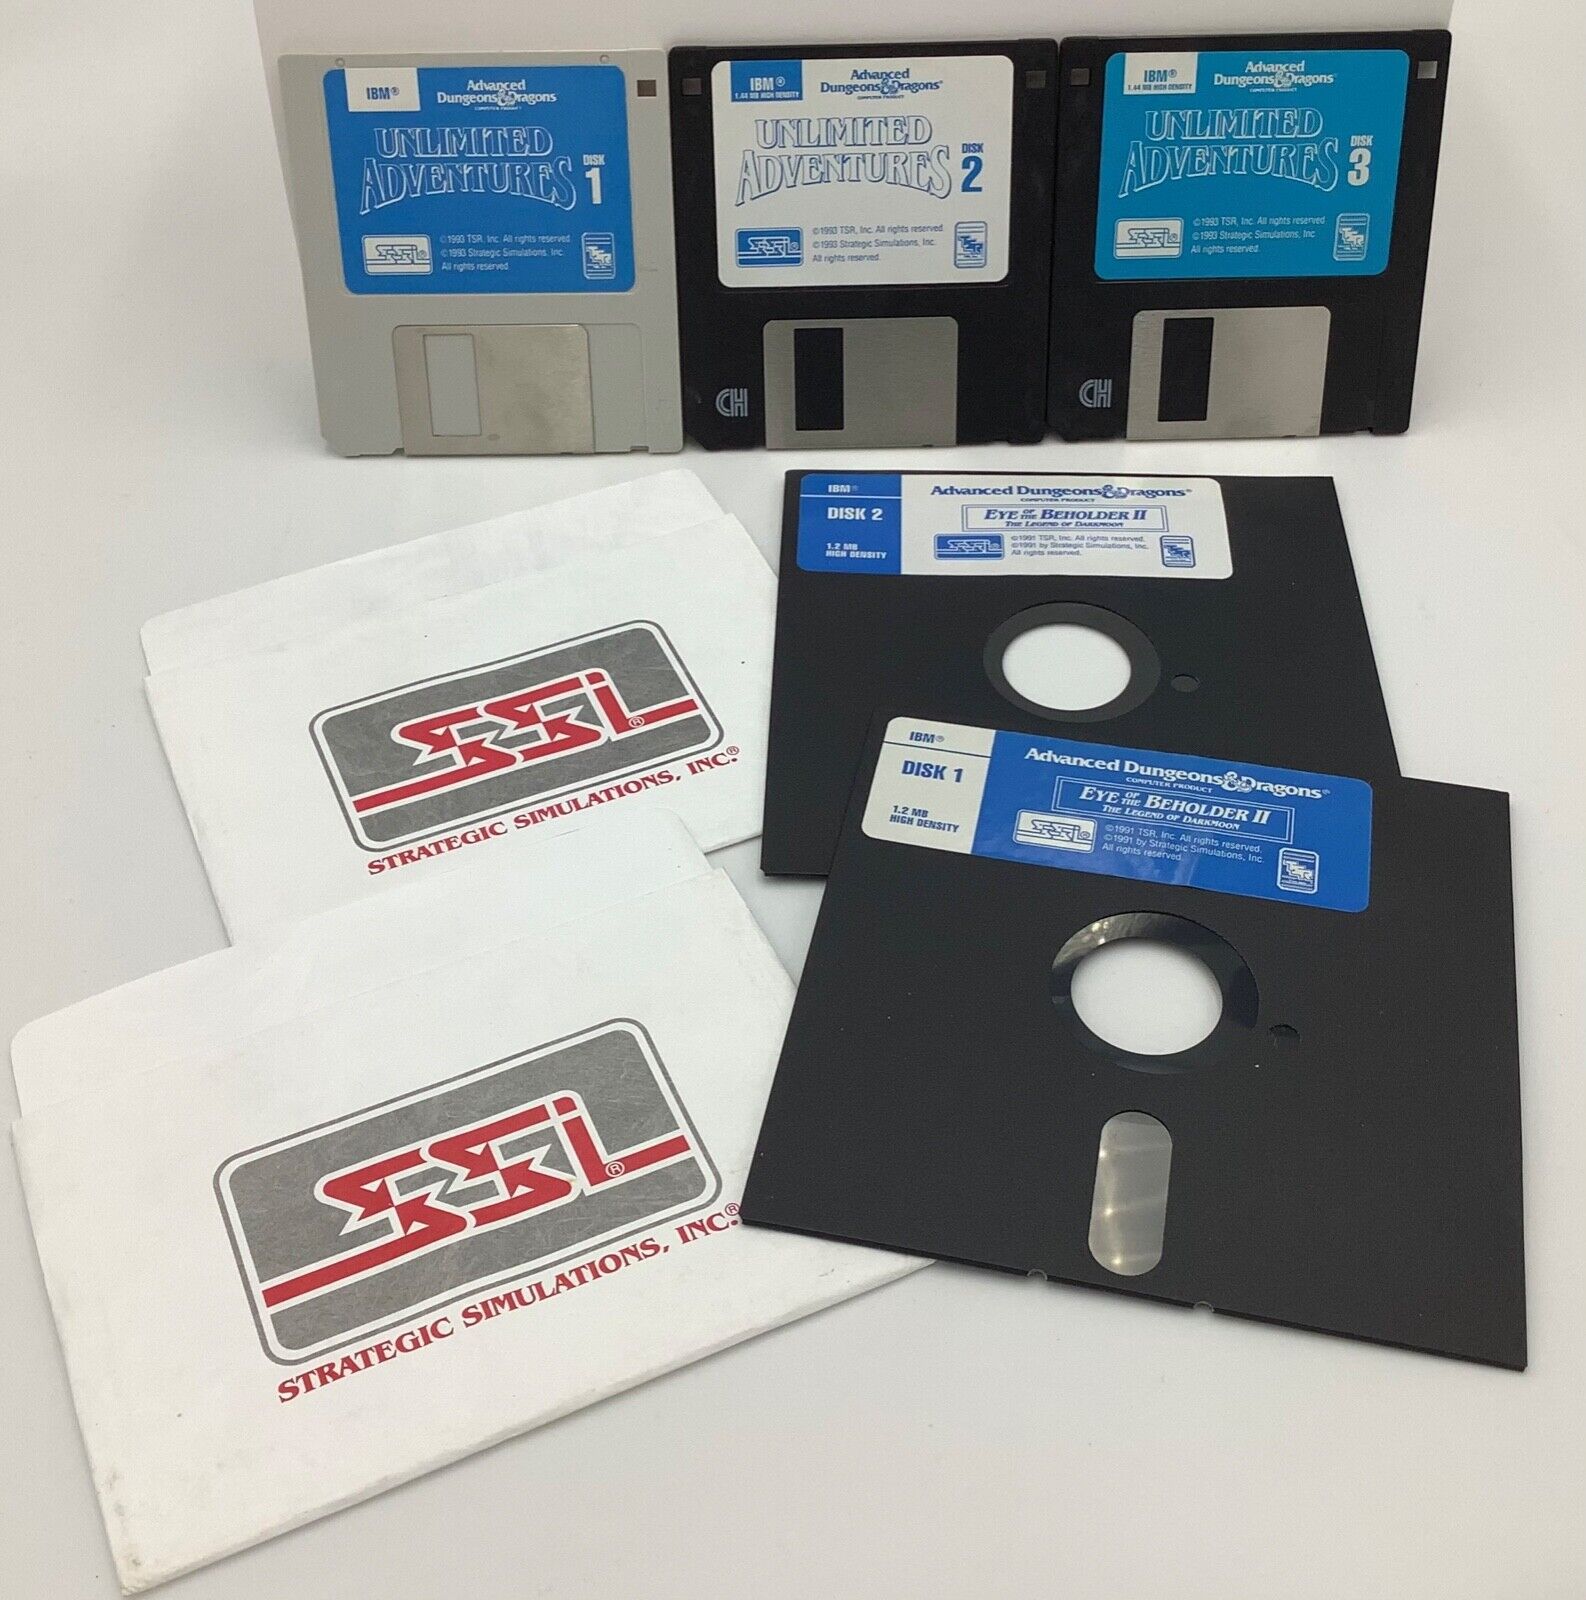 TWO Vintage Advanced D&D PC Gaming 5.25 Floppy diskettes & 3.5in floppy disk